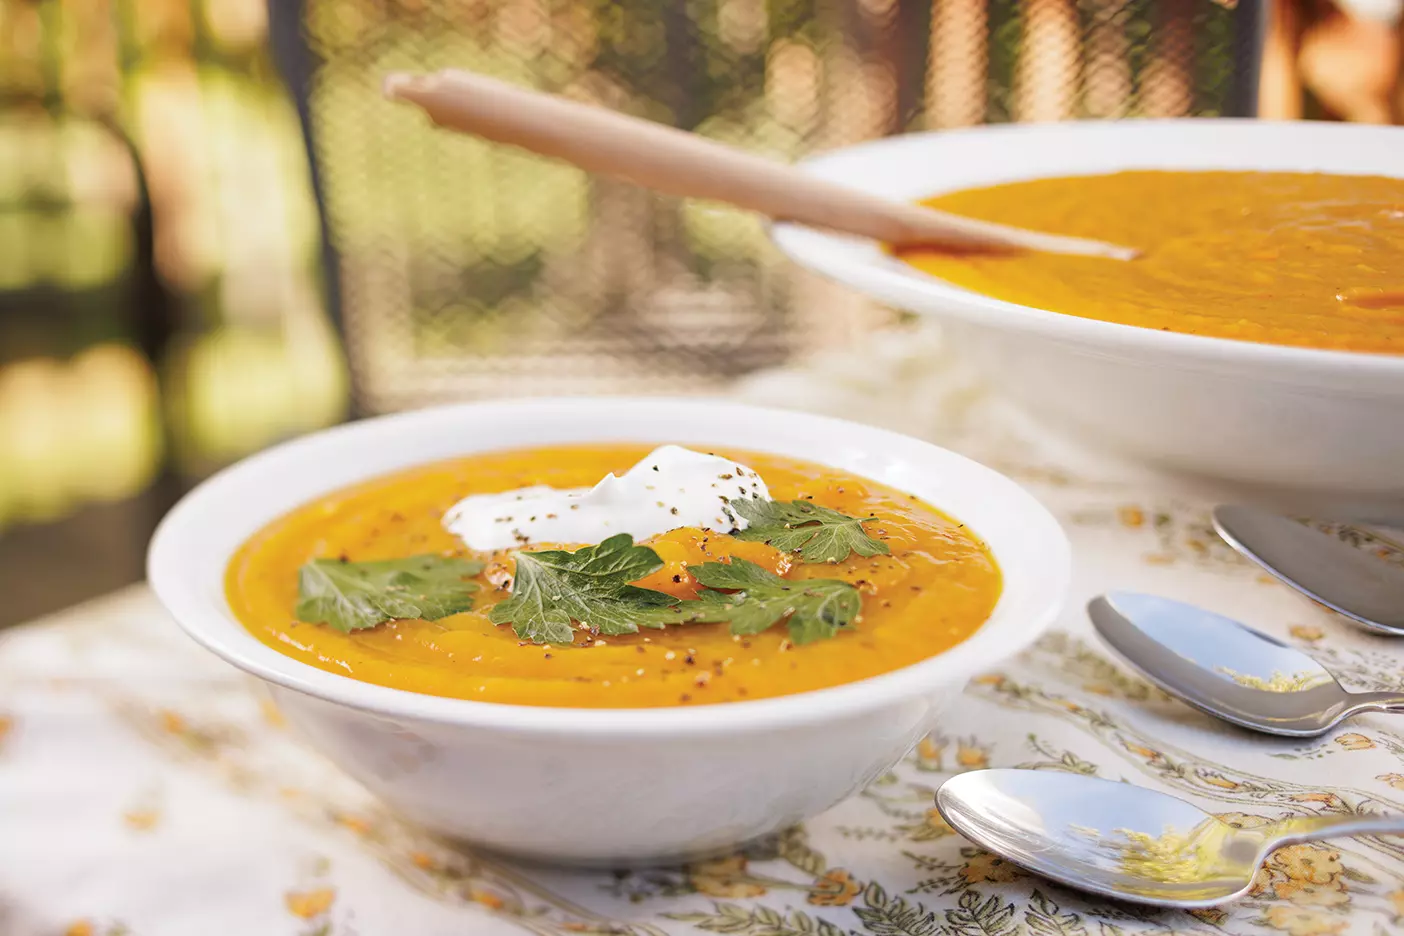 Orange pumpkin soup topped with herbs and cream is served in a white bowl.